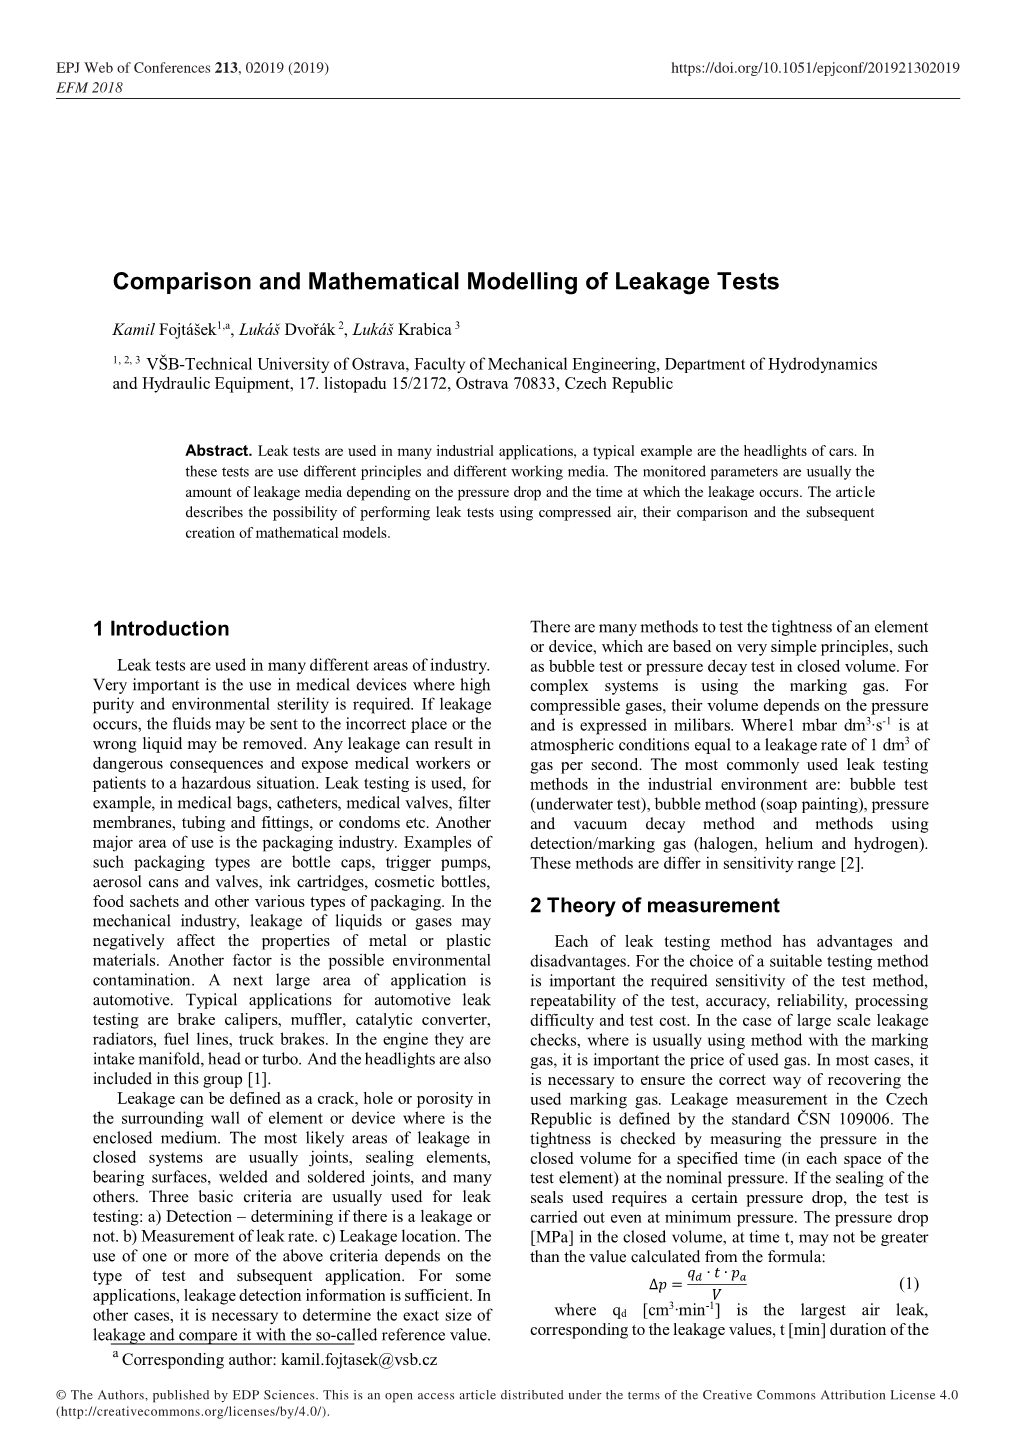 Comparison and Mathematical Modelling of Leakage Tests